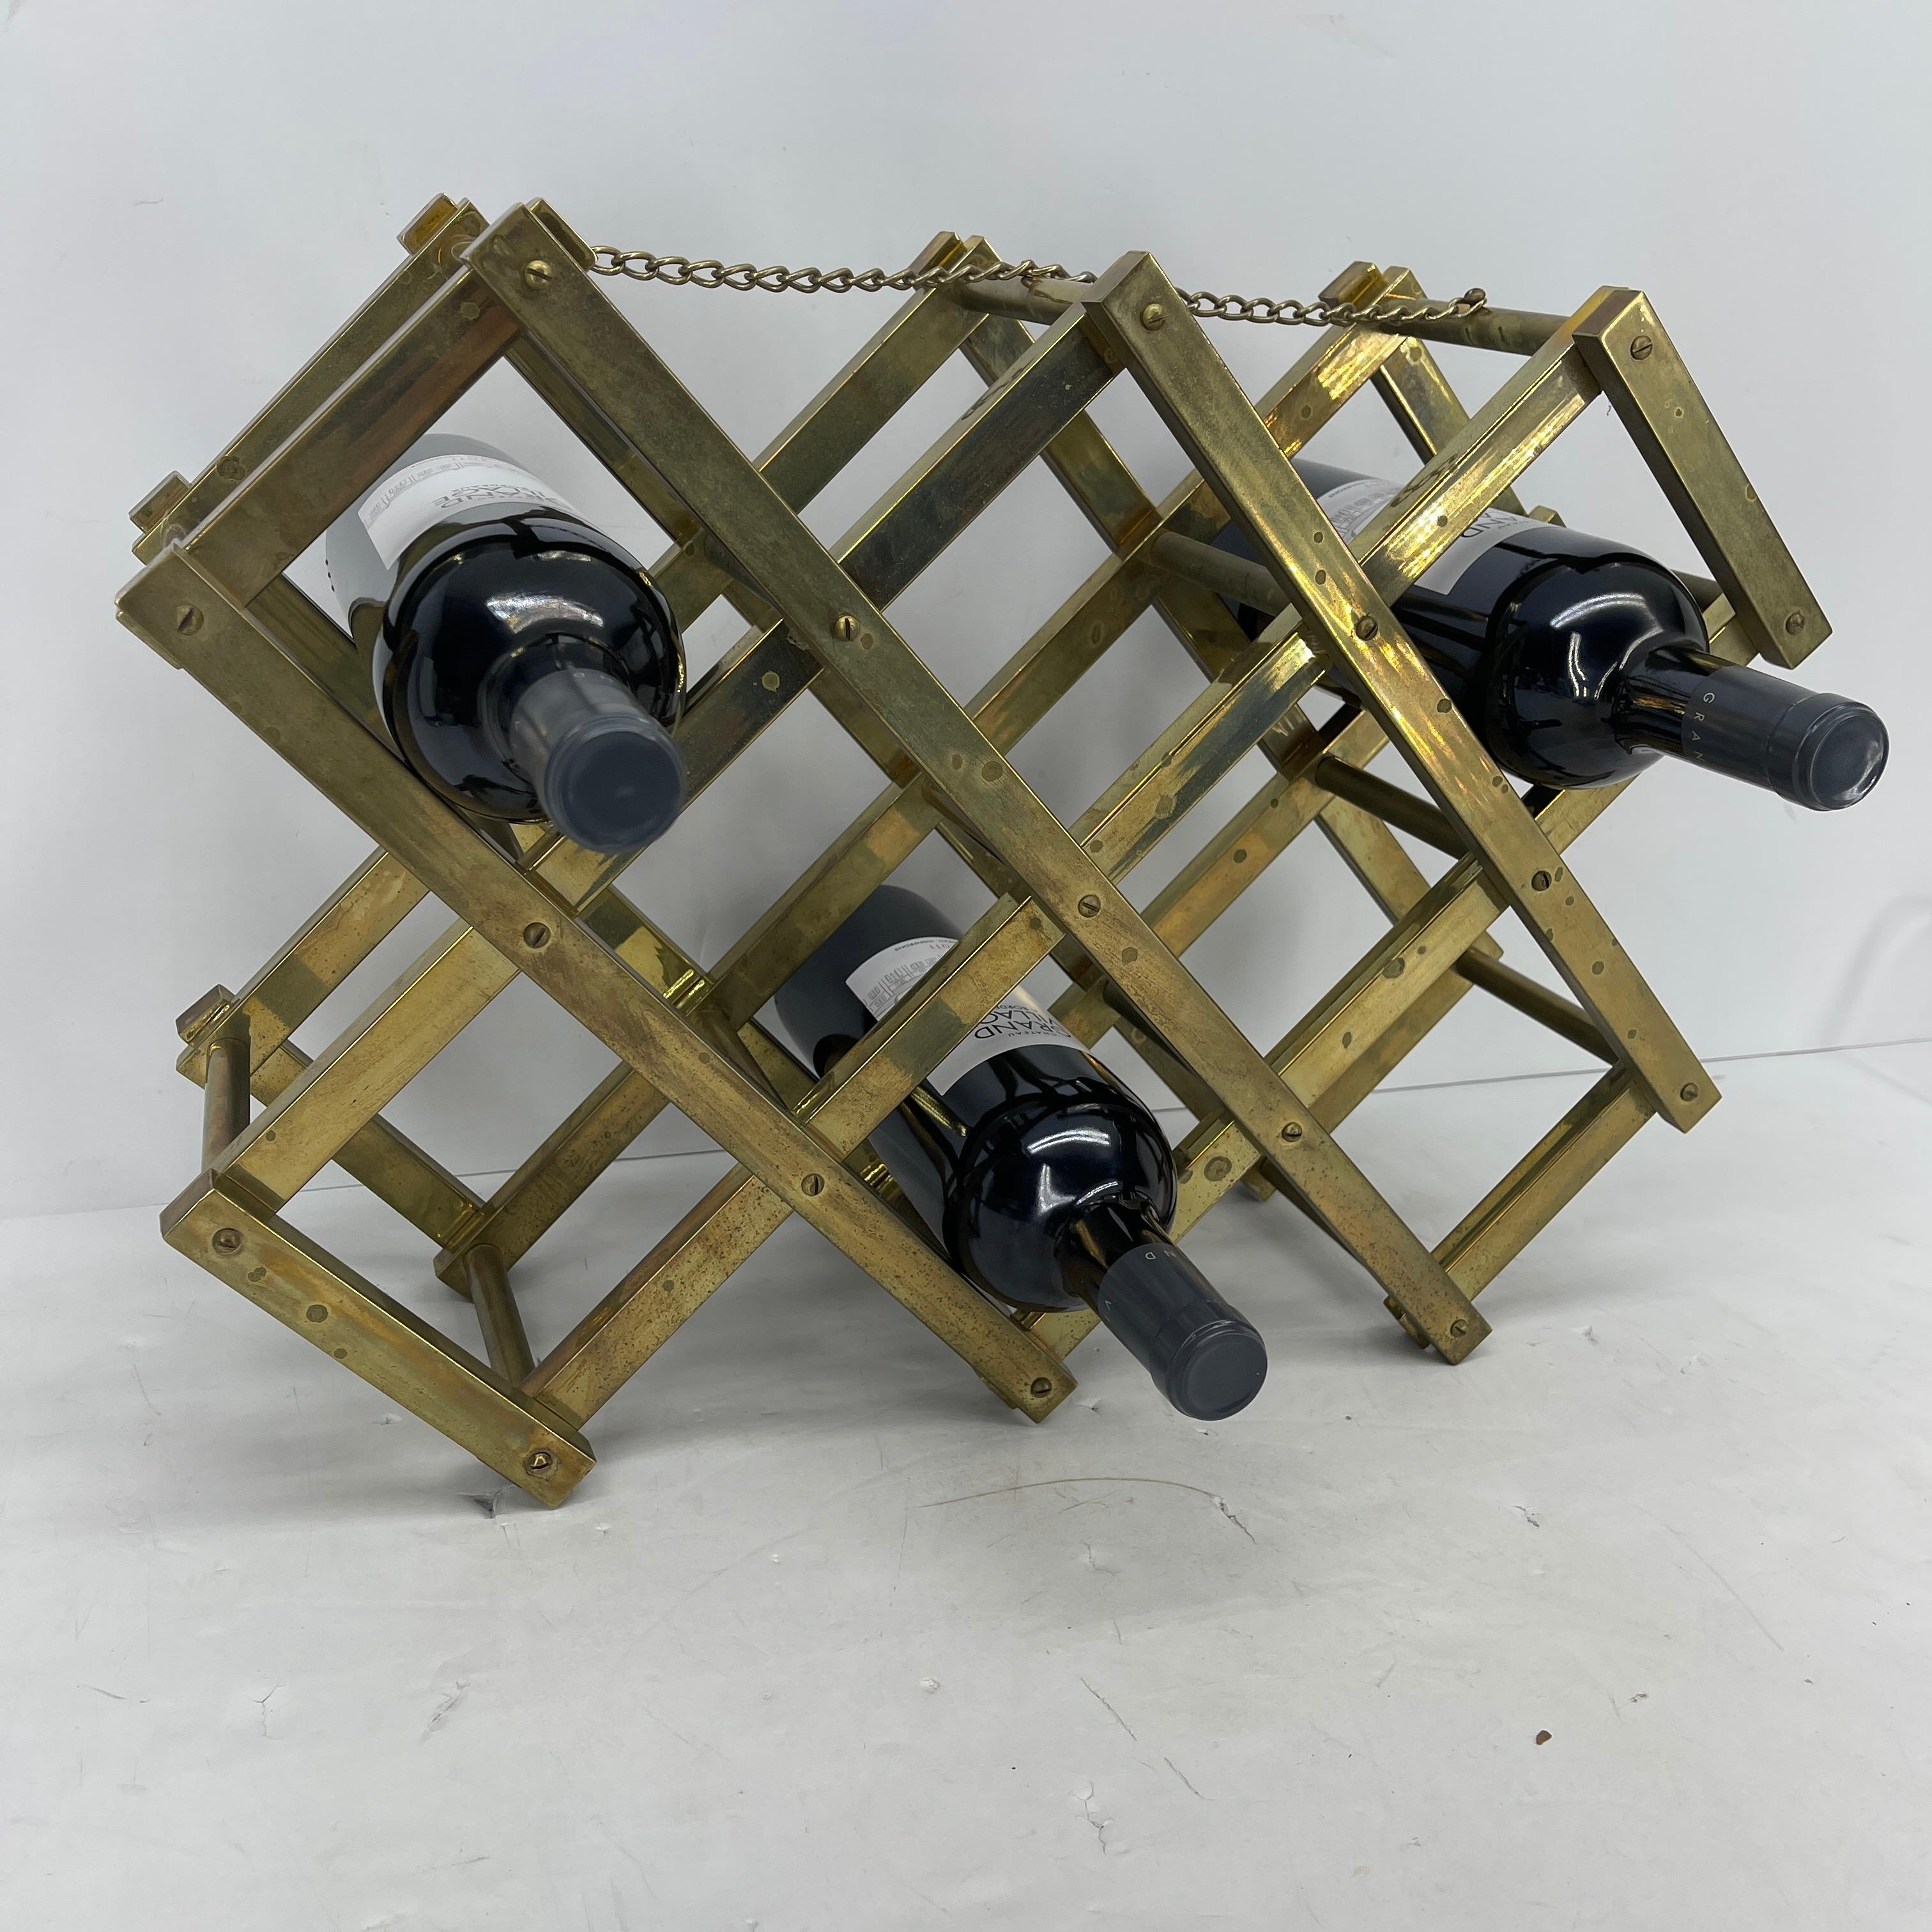 Mid-Century Modern brass foldable wine rack with decorative chain along top. The rack holds 10 bottles of wine. The wine rack has an aged brass patina. Fully collapsible, this sturdy wine rack can easily be transported to any on the go party or